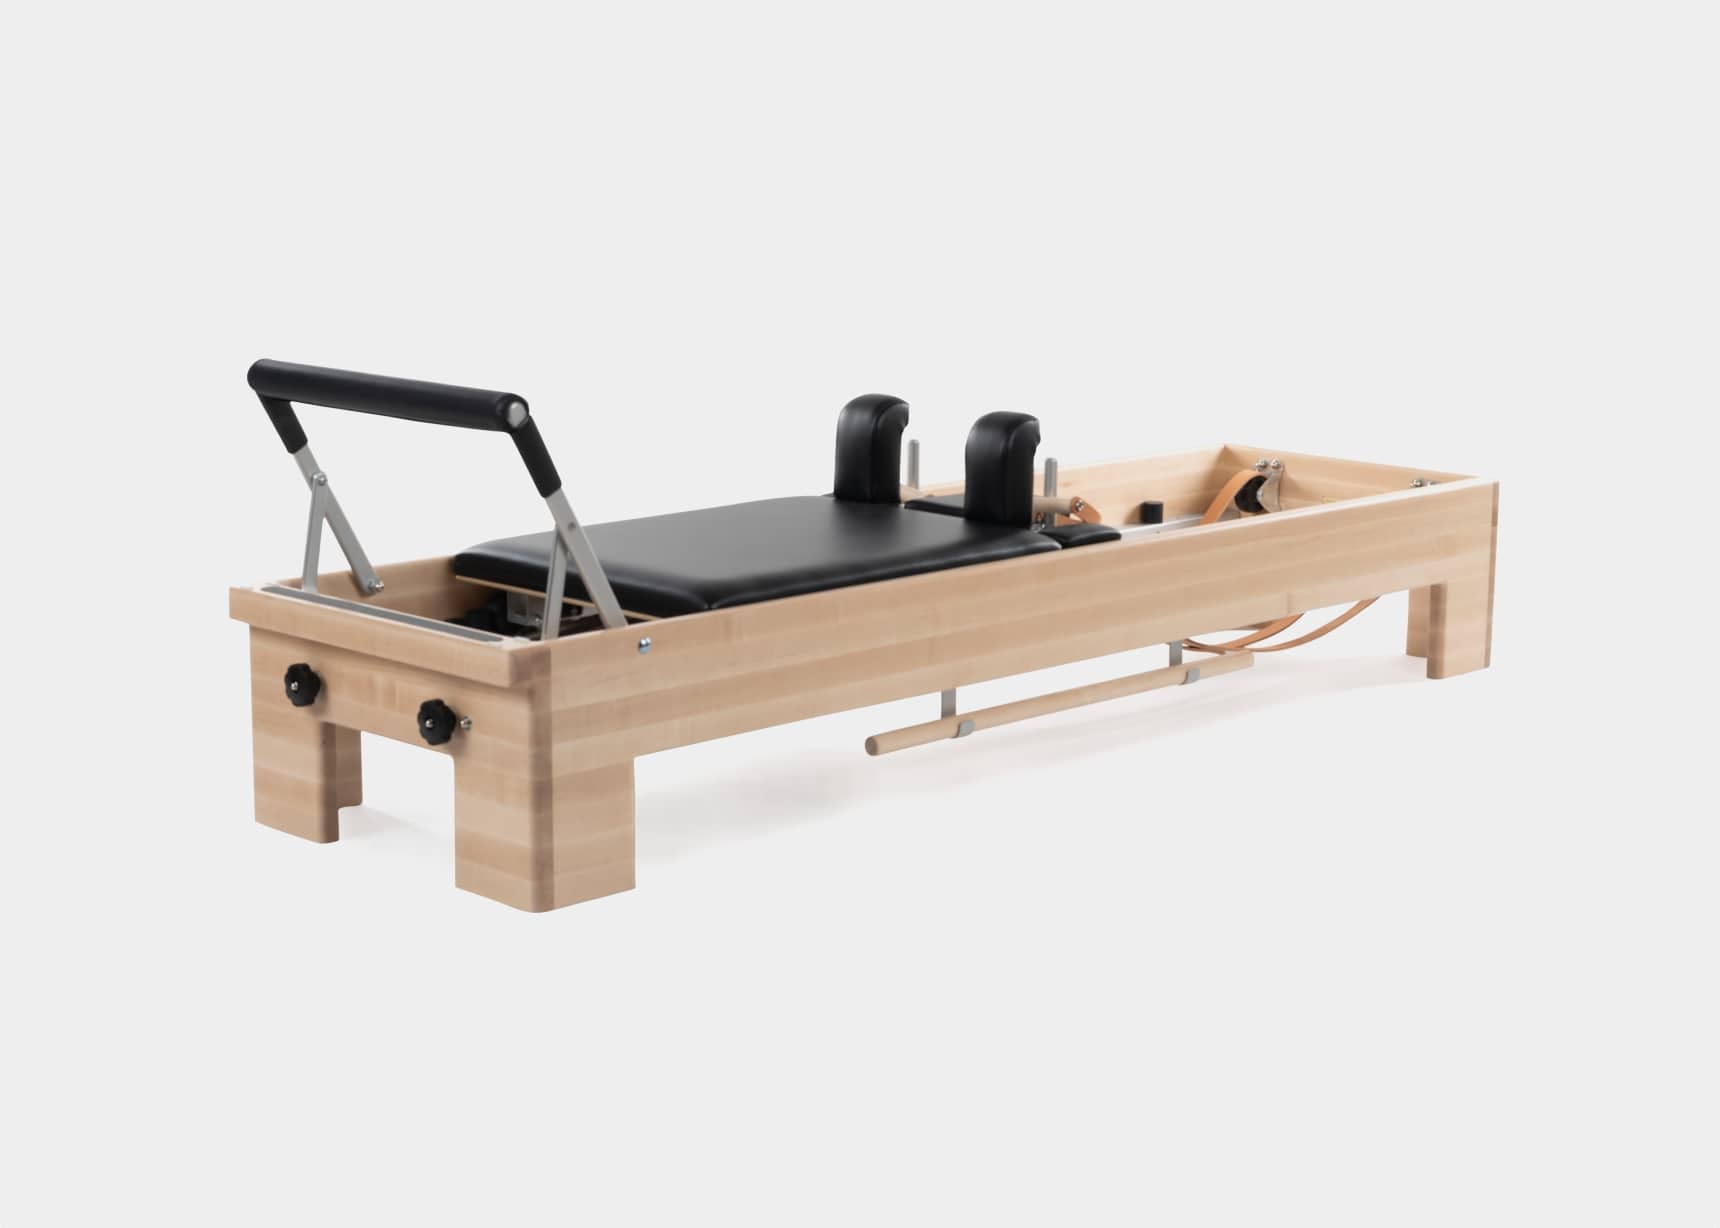  Balanced Body Contrology 86-Inch Pilates Reformer Machine with  Tower, Classical Pilates Workout Equipment, Perfect for at-Home Gym or  Studio, Pilates Exercise Equipment for Fitness and Strength, Black : Sports  